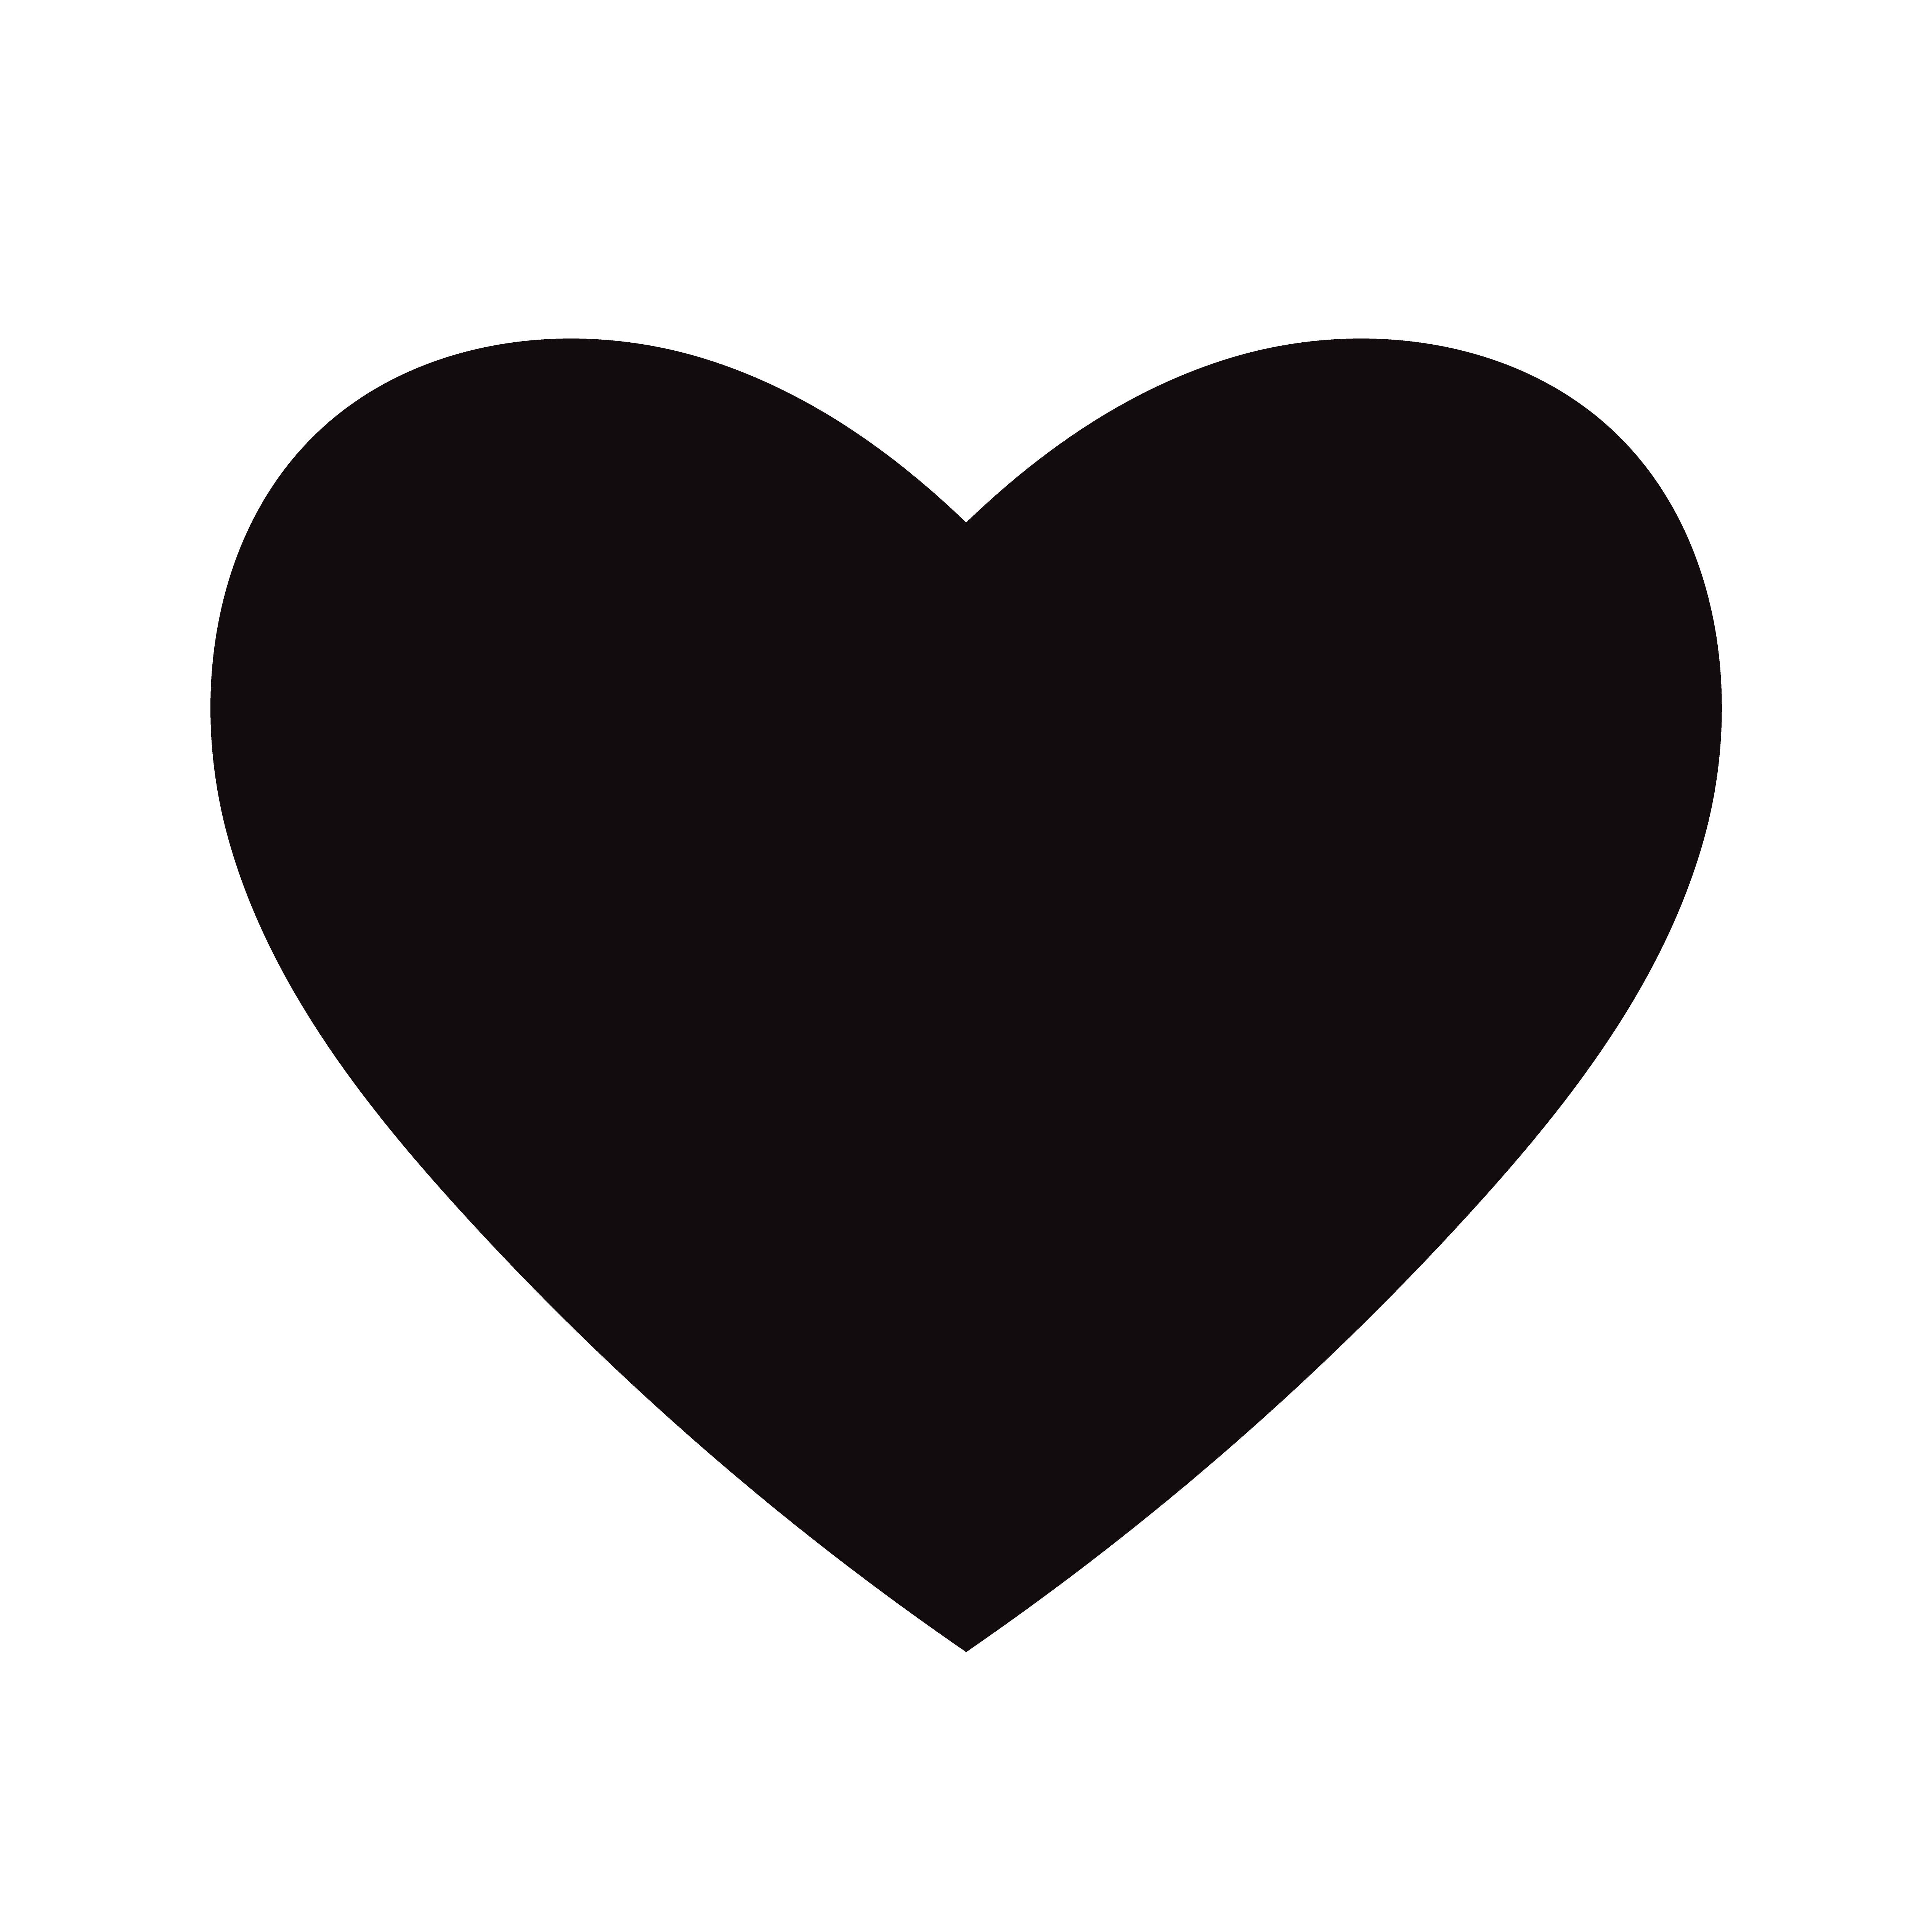 Flat Black Heart Icon Isolated on White Background. Vector